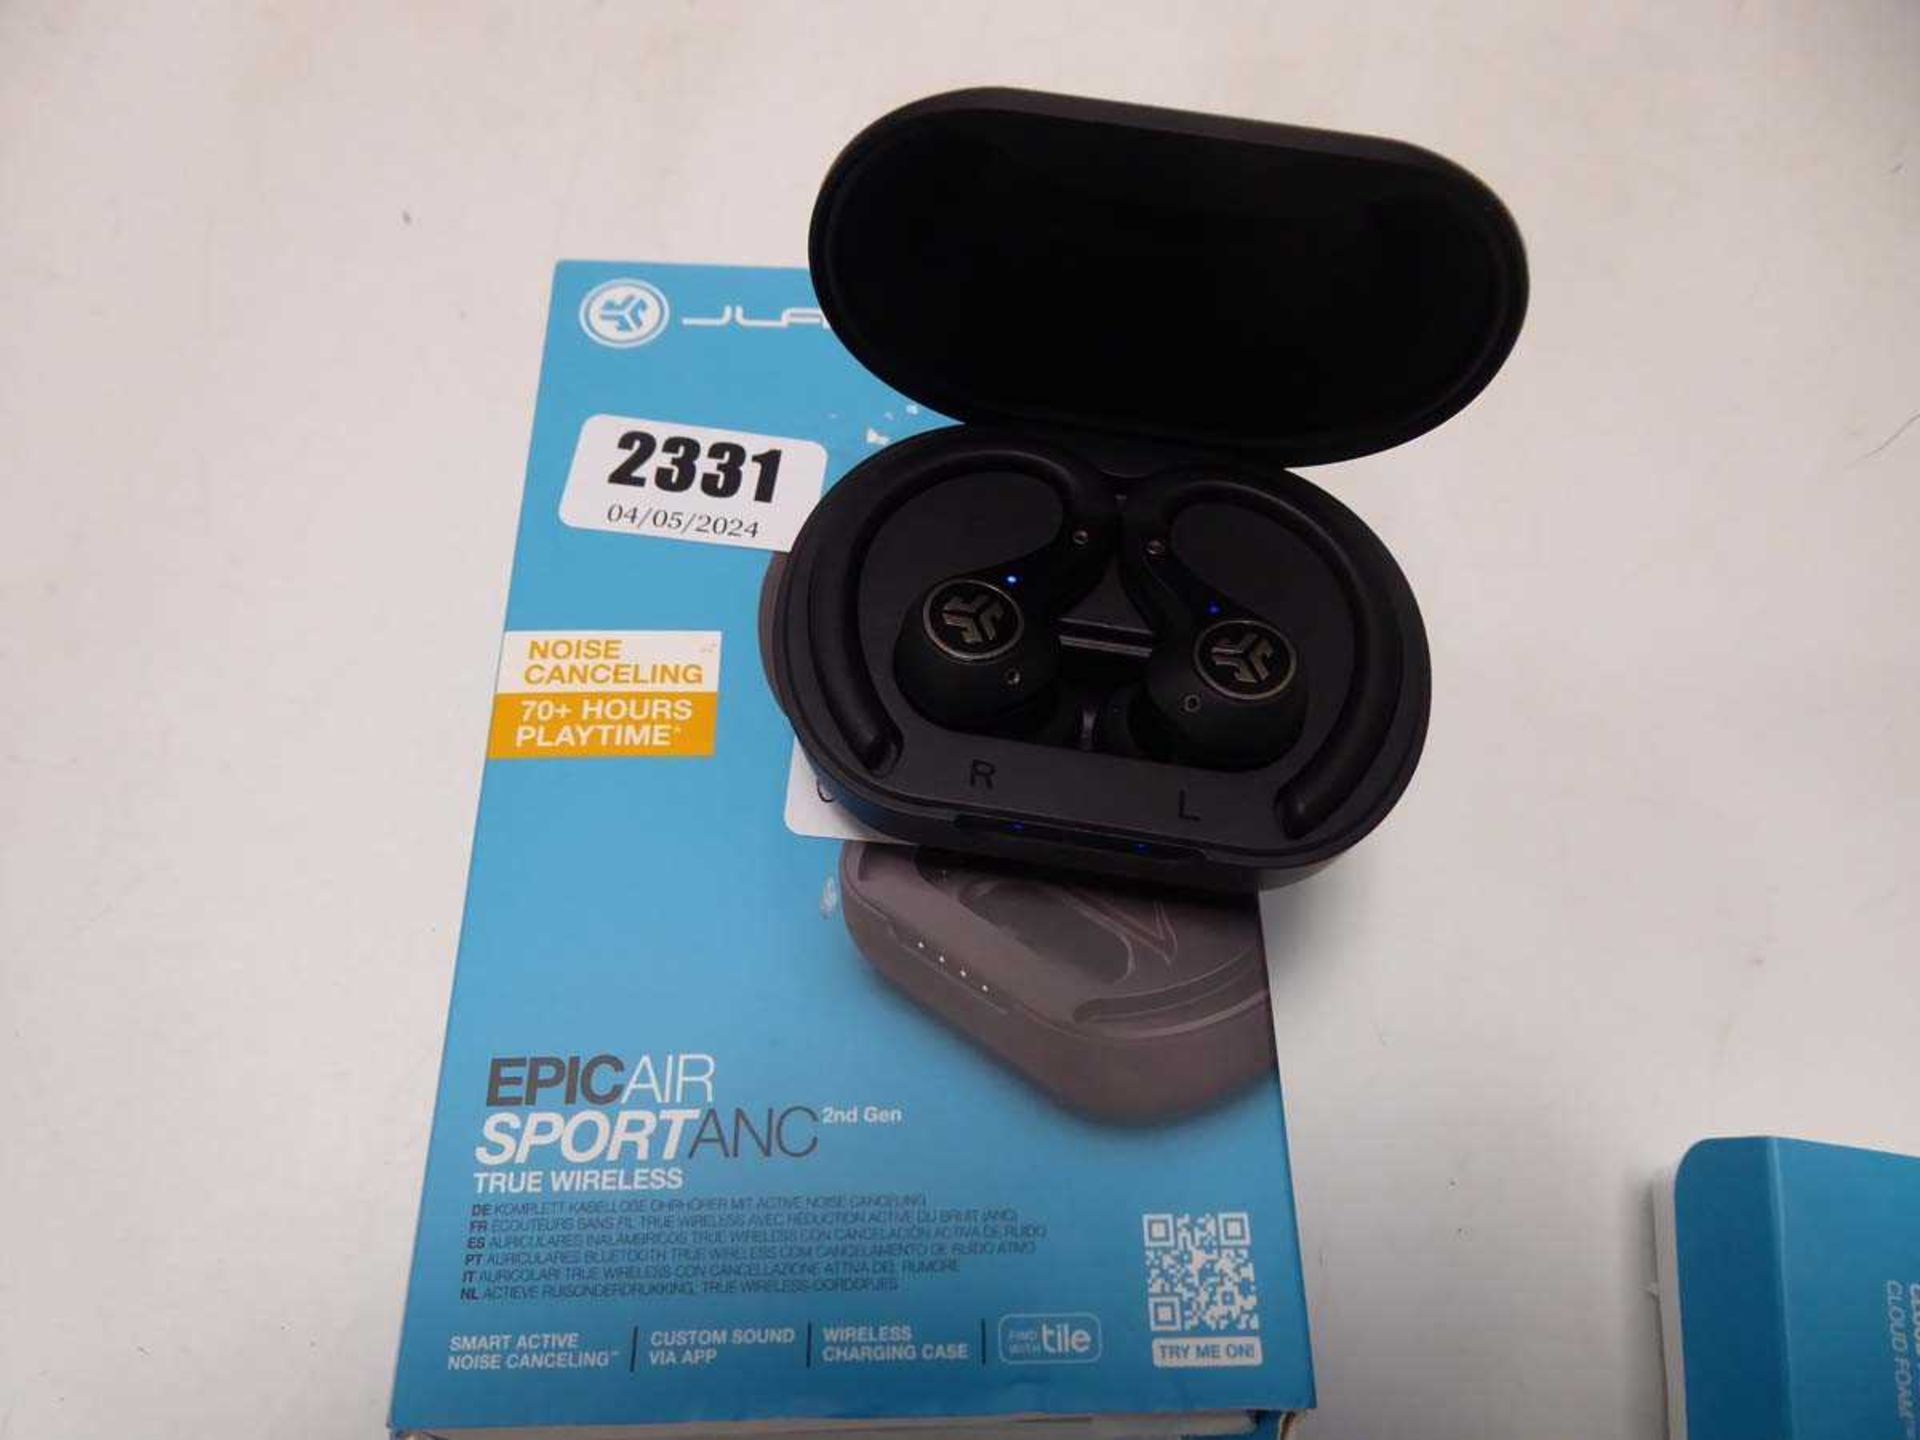 Boxed JLab Epic Air Sport ANC True wireless earbuds